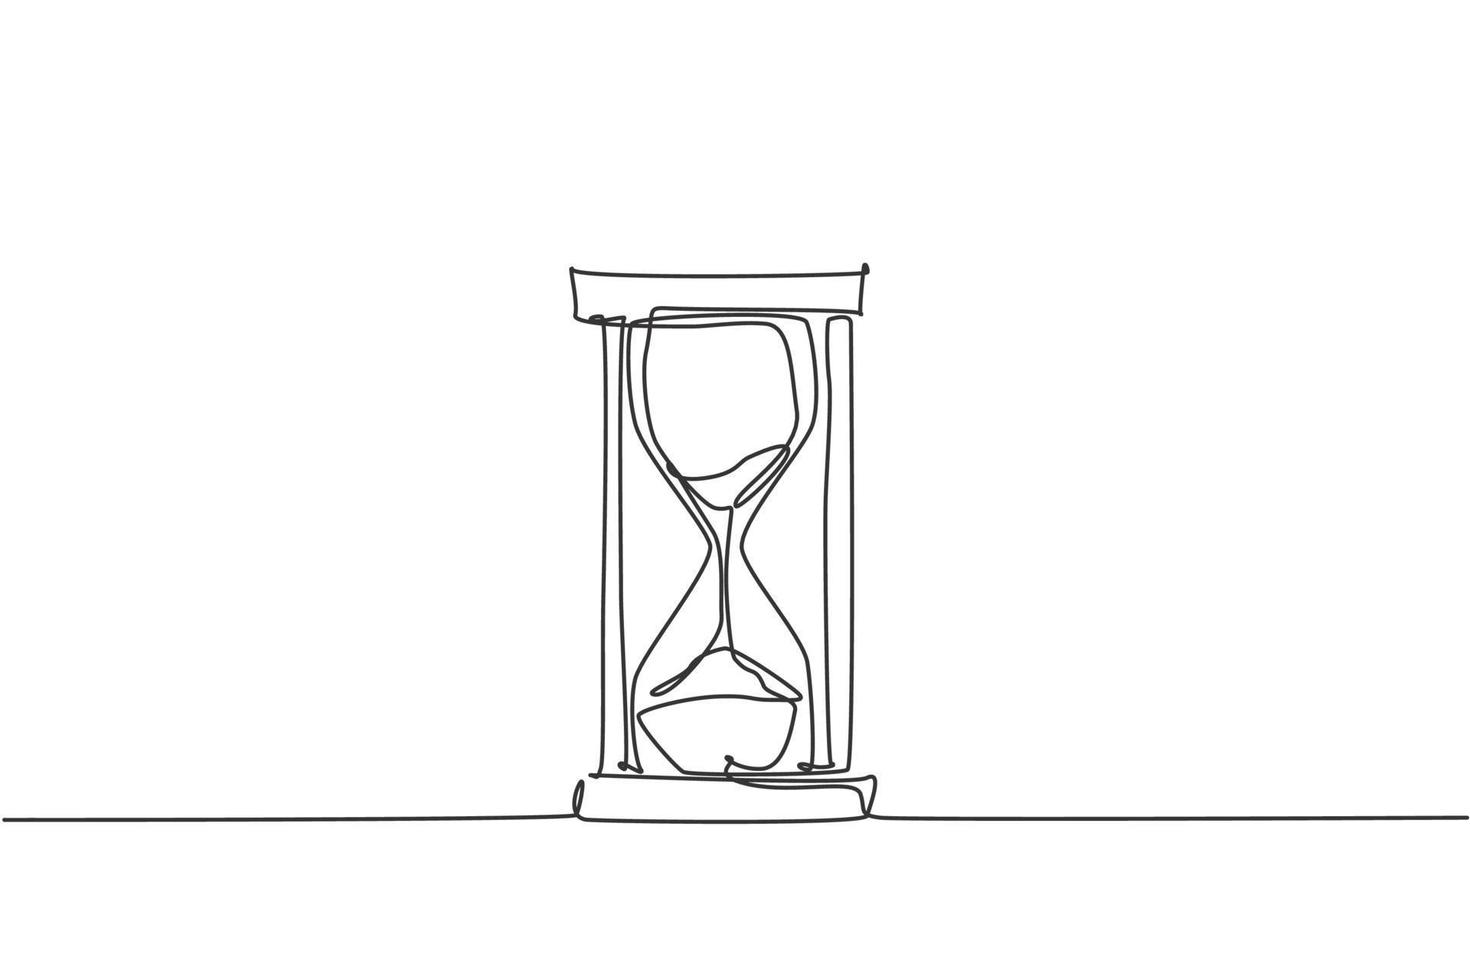 One continuous line drawing of old classic hourglass. Sand glass for showing deadline time at business metaphor concept. Trendy single line draw design vector graphic illustration